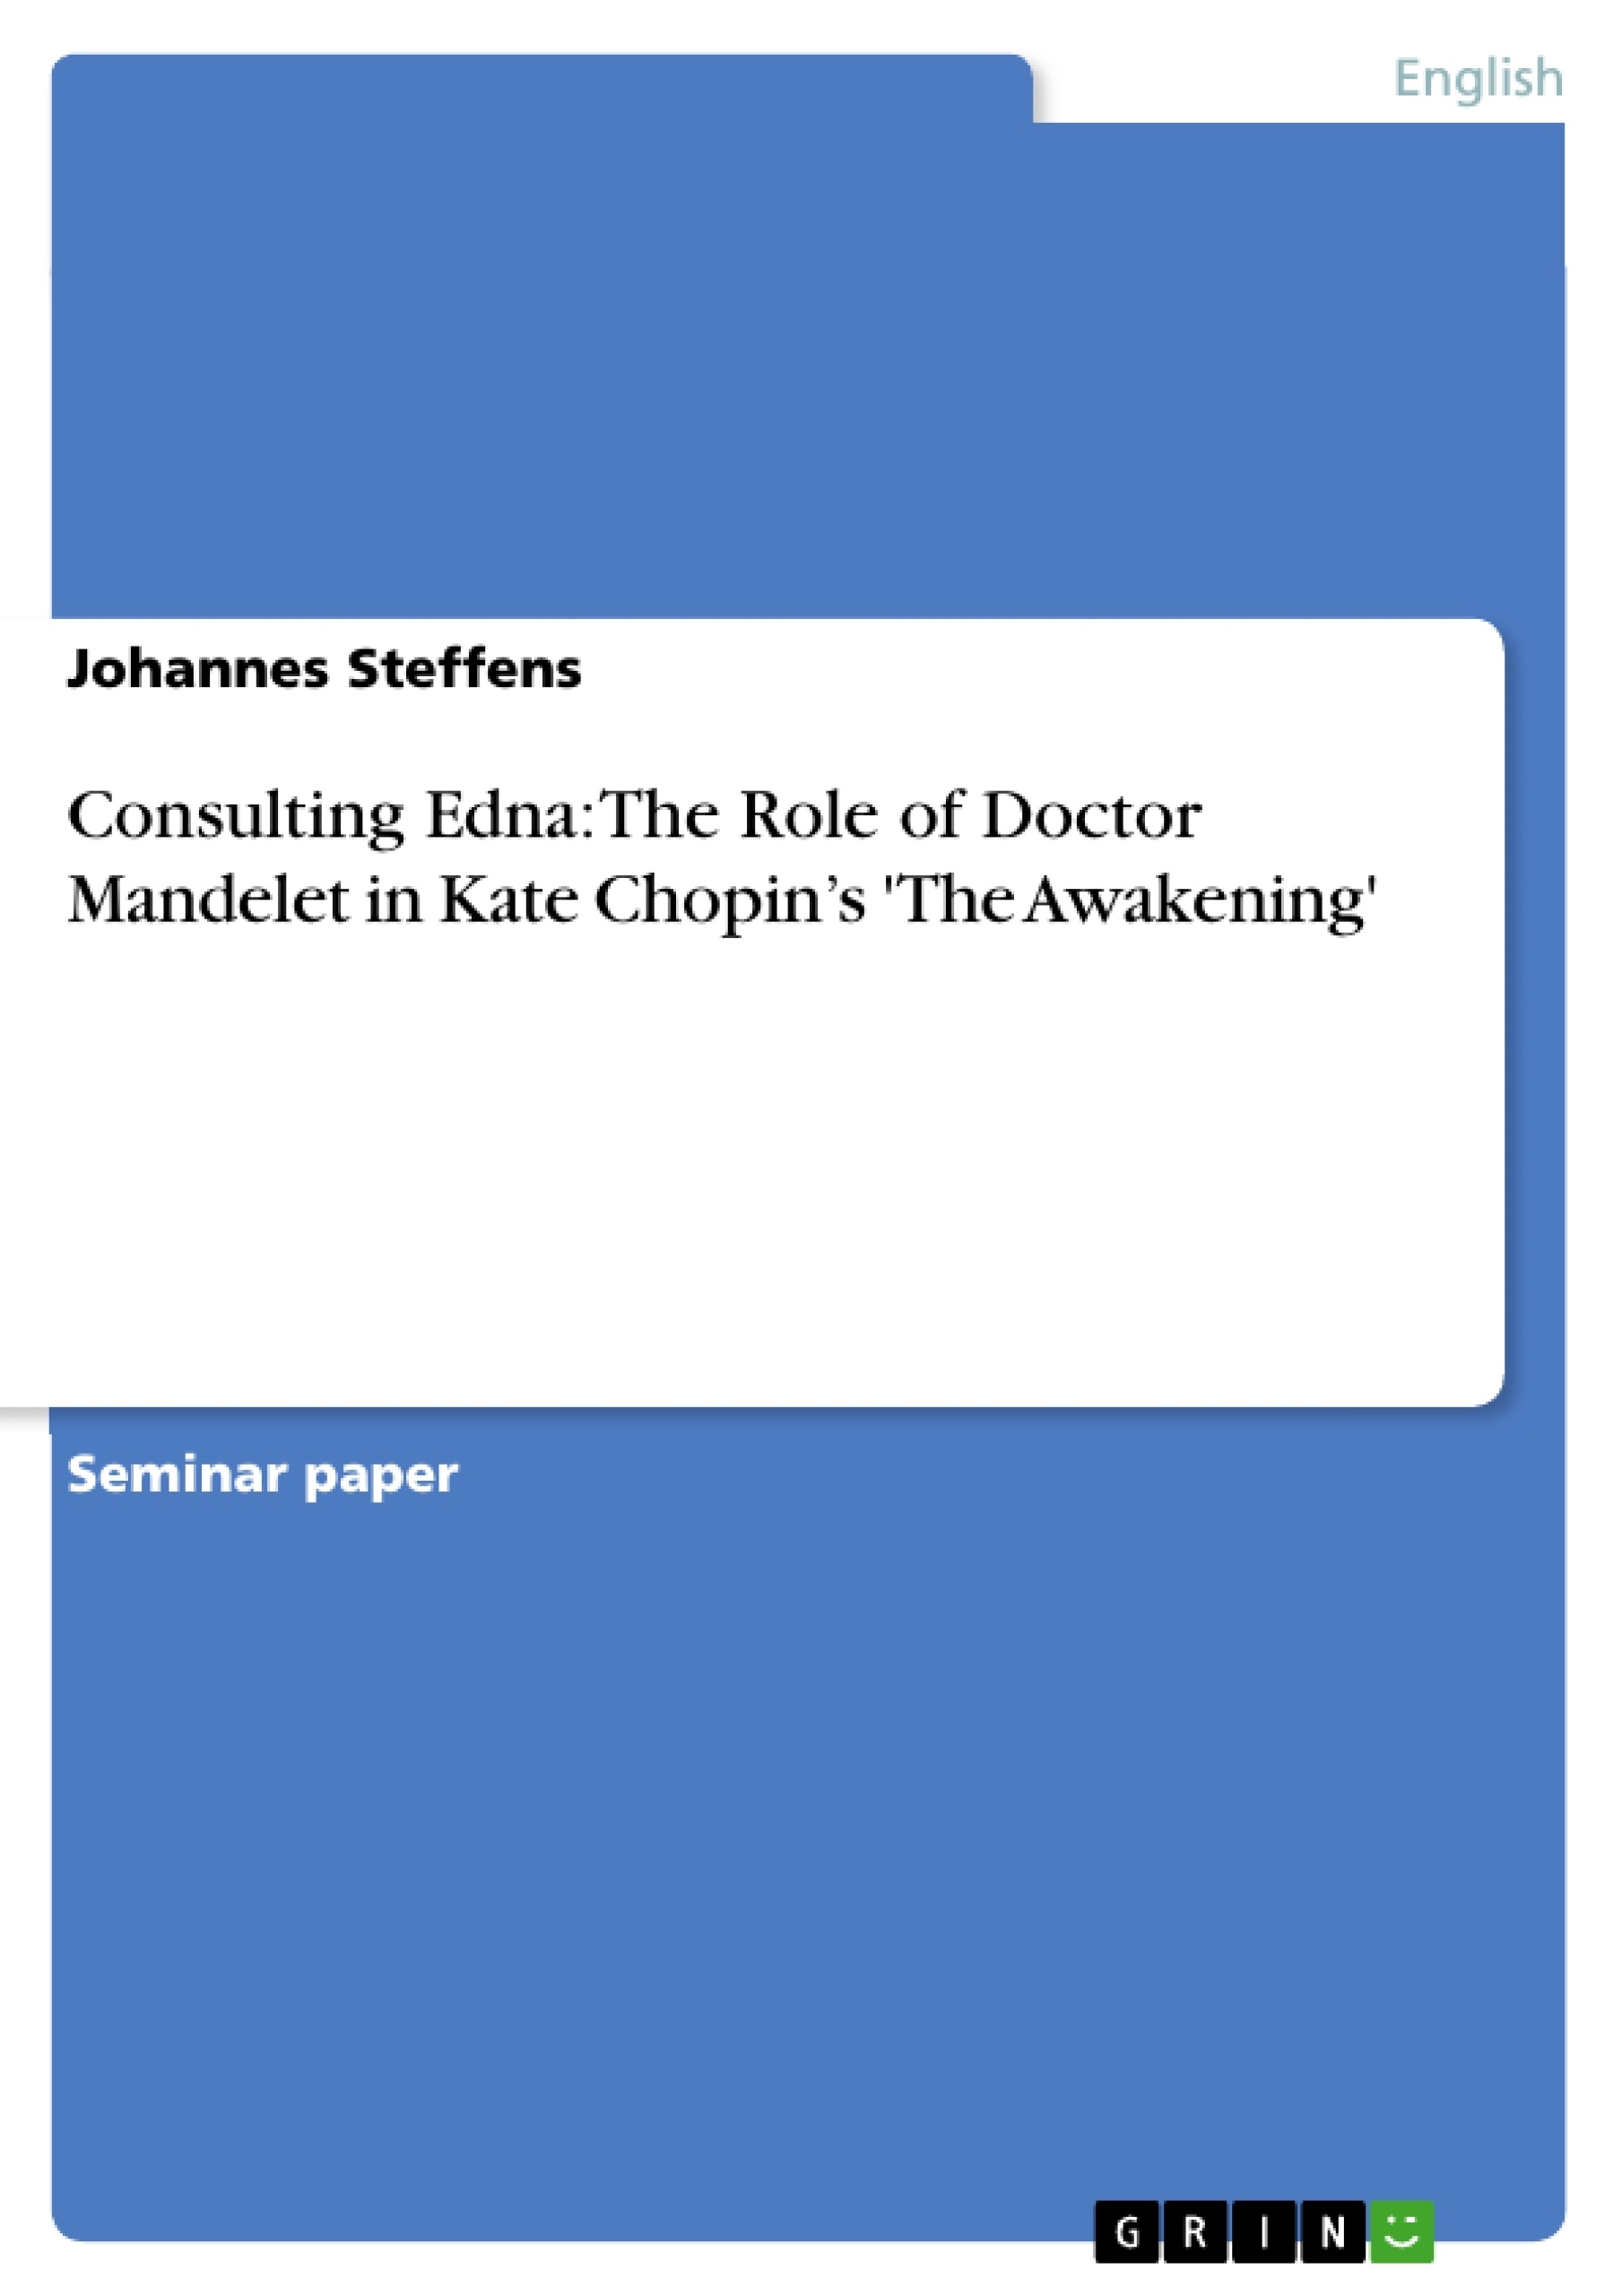 Título: Consulting Edna: The Role of Doctor Mandelet in Kate Chopin’s 'The Awakening'